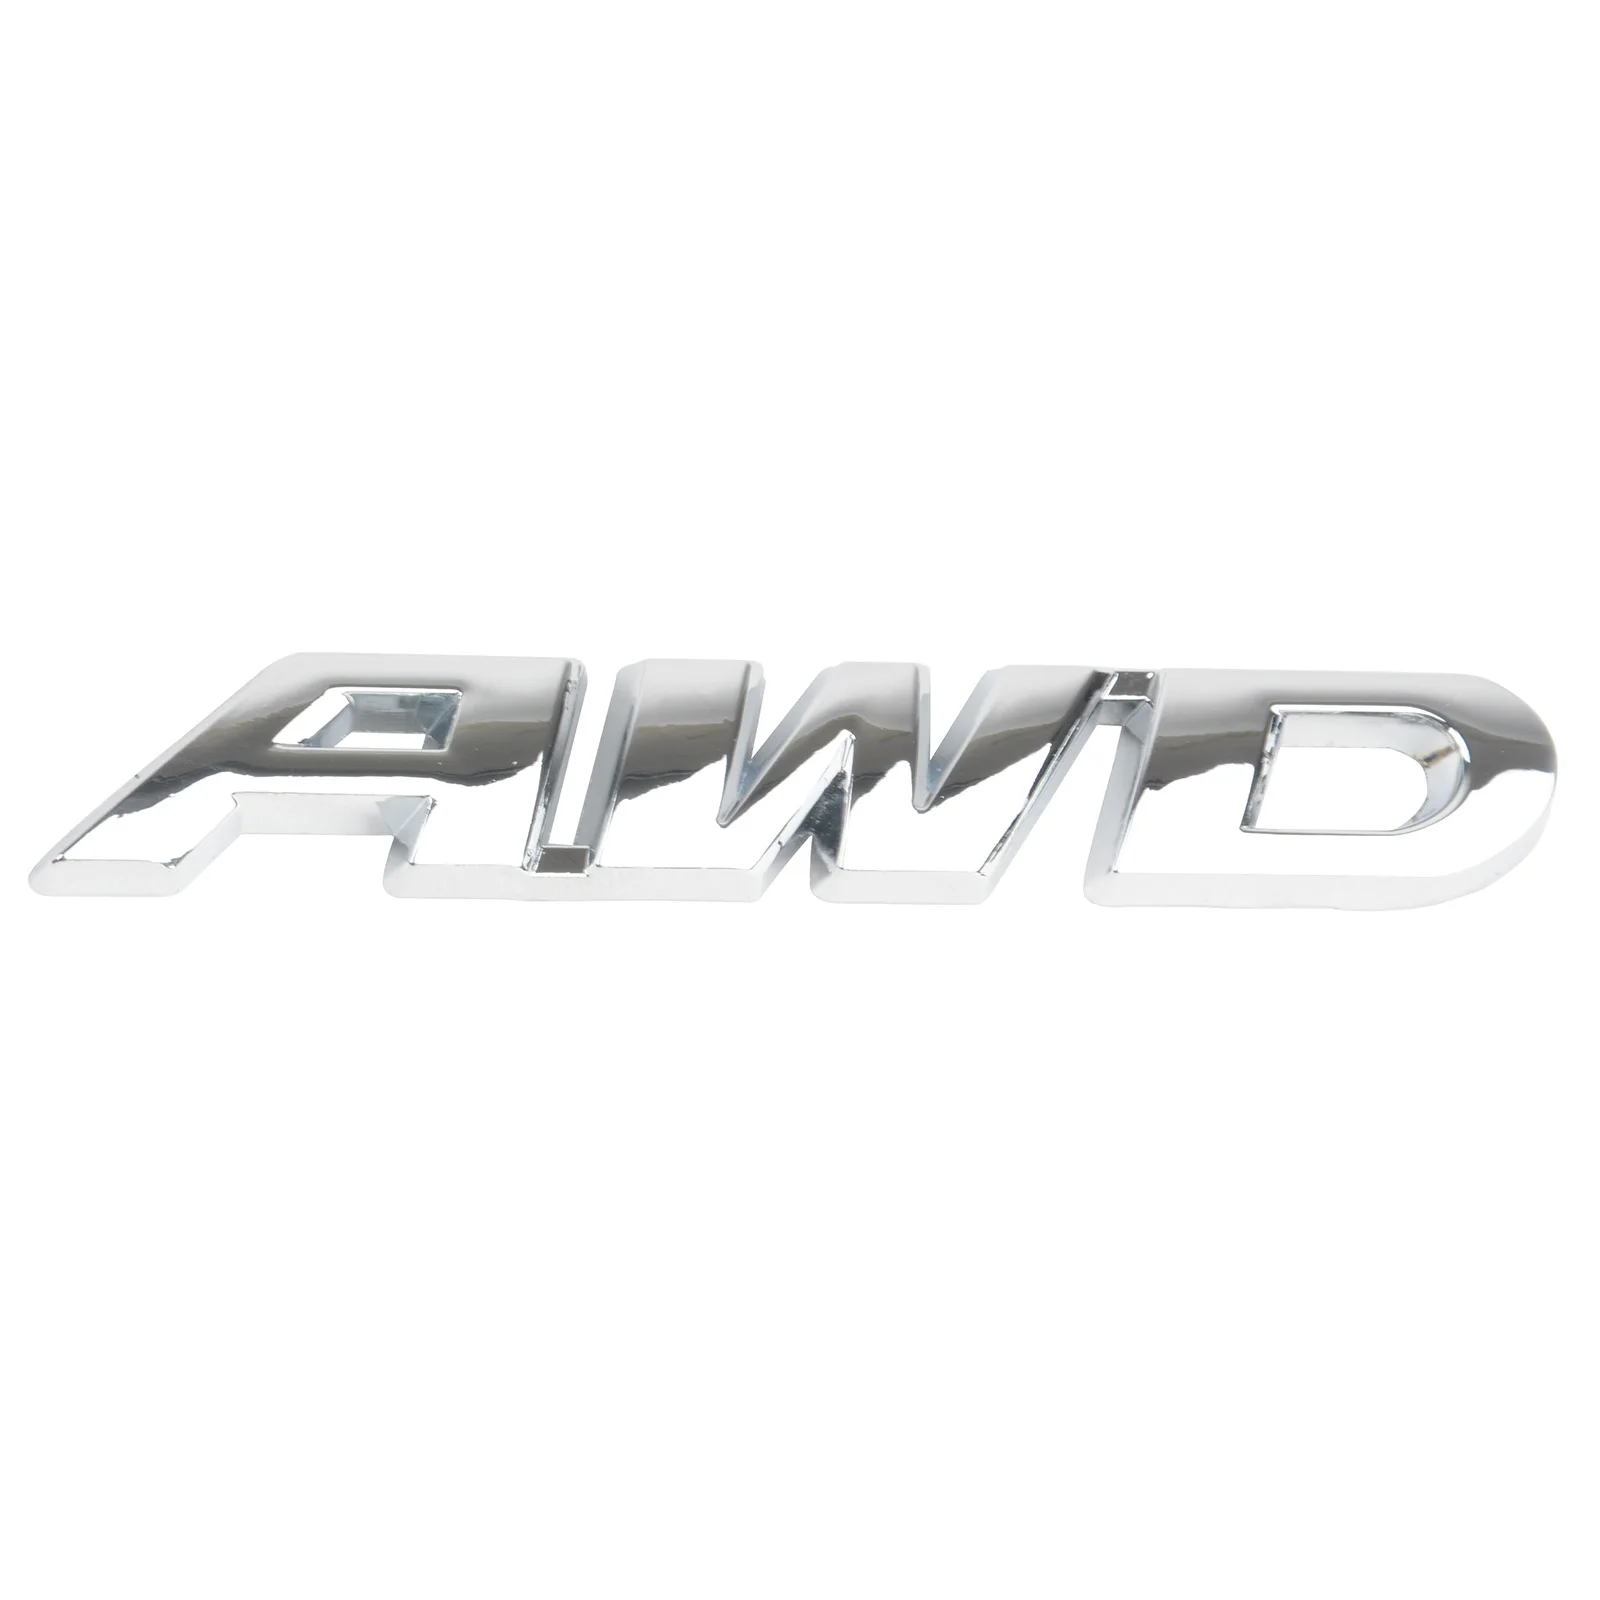 Silver AWD Metal Emblem Sticker Badge Decal for 4 Wheel Drive Car SUV Tailgate